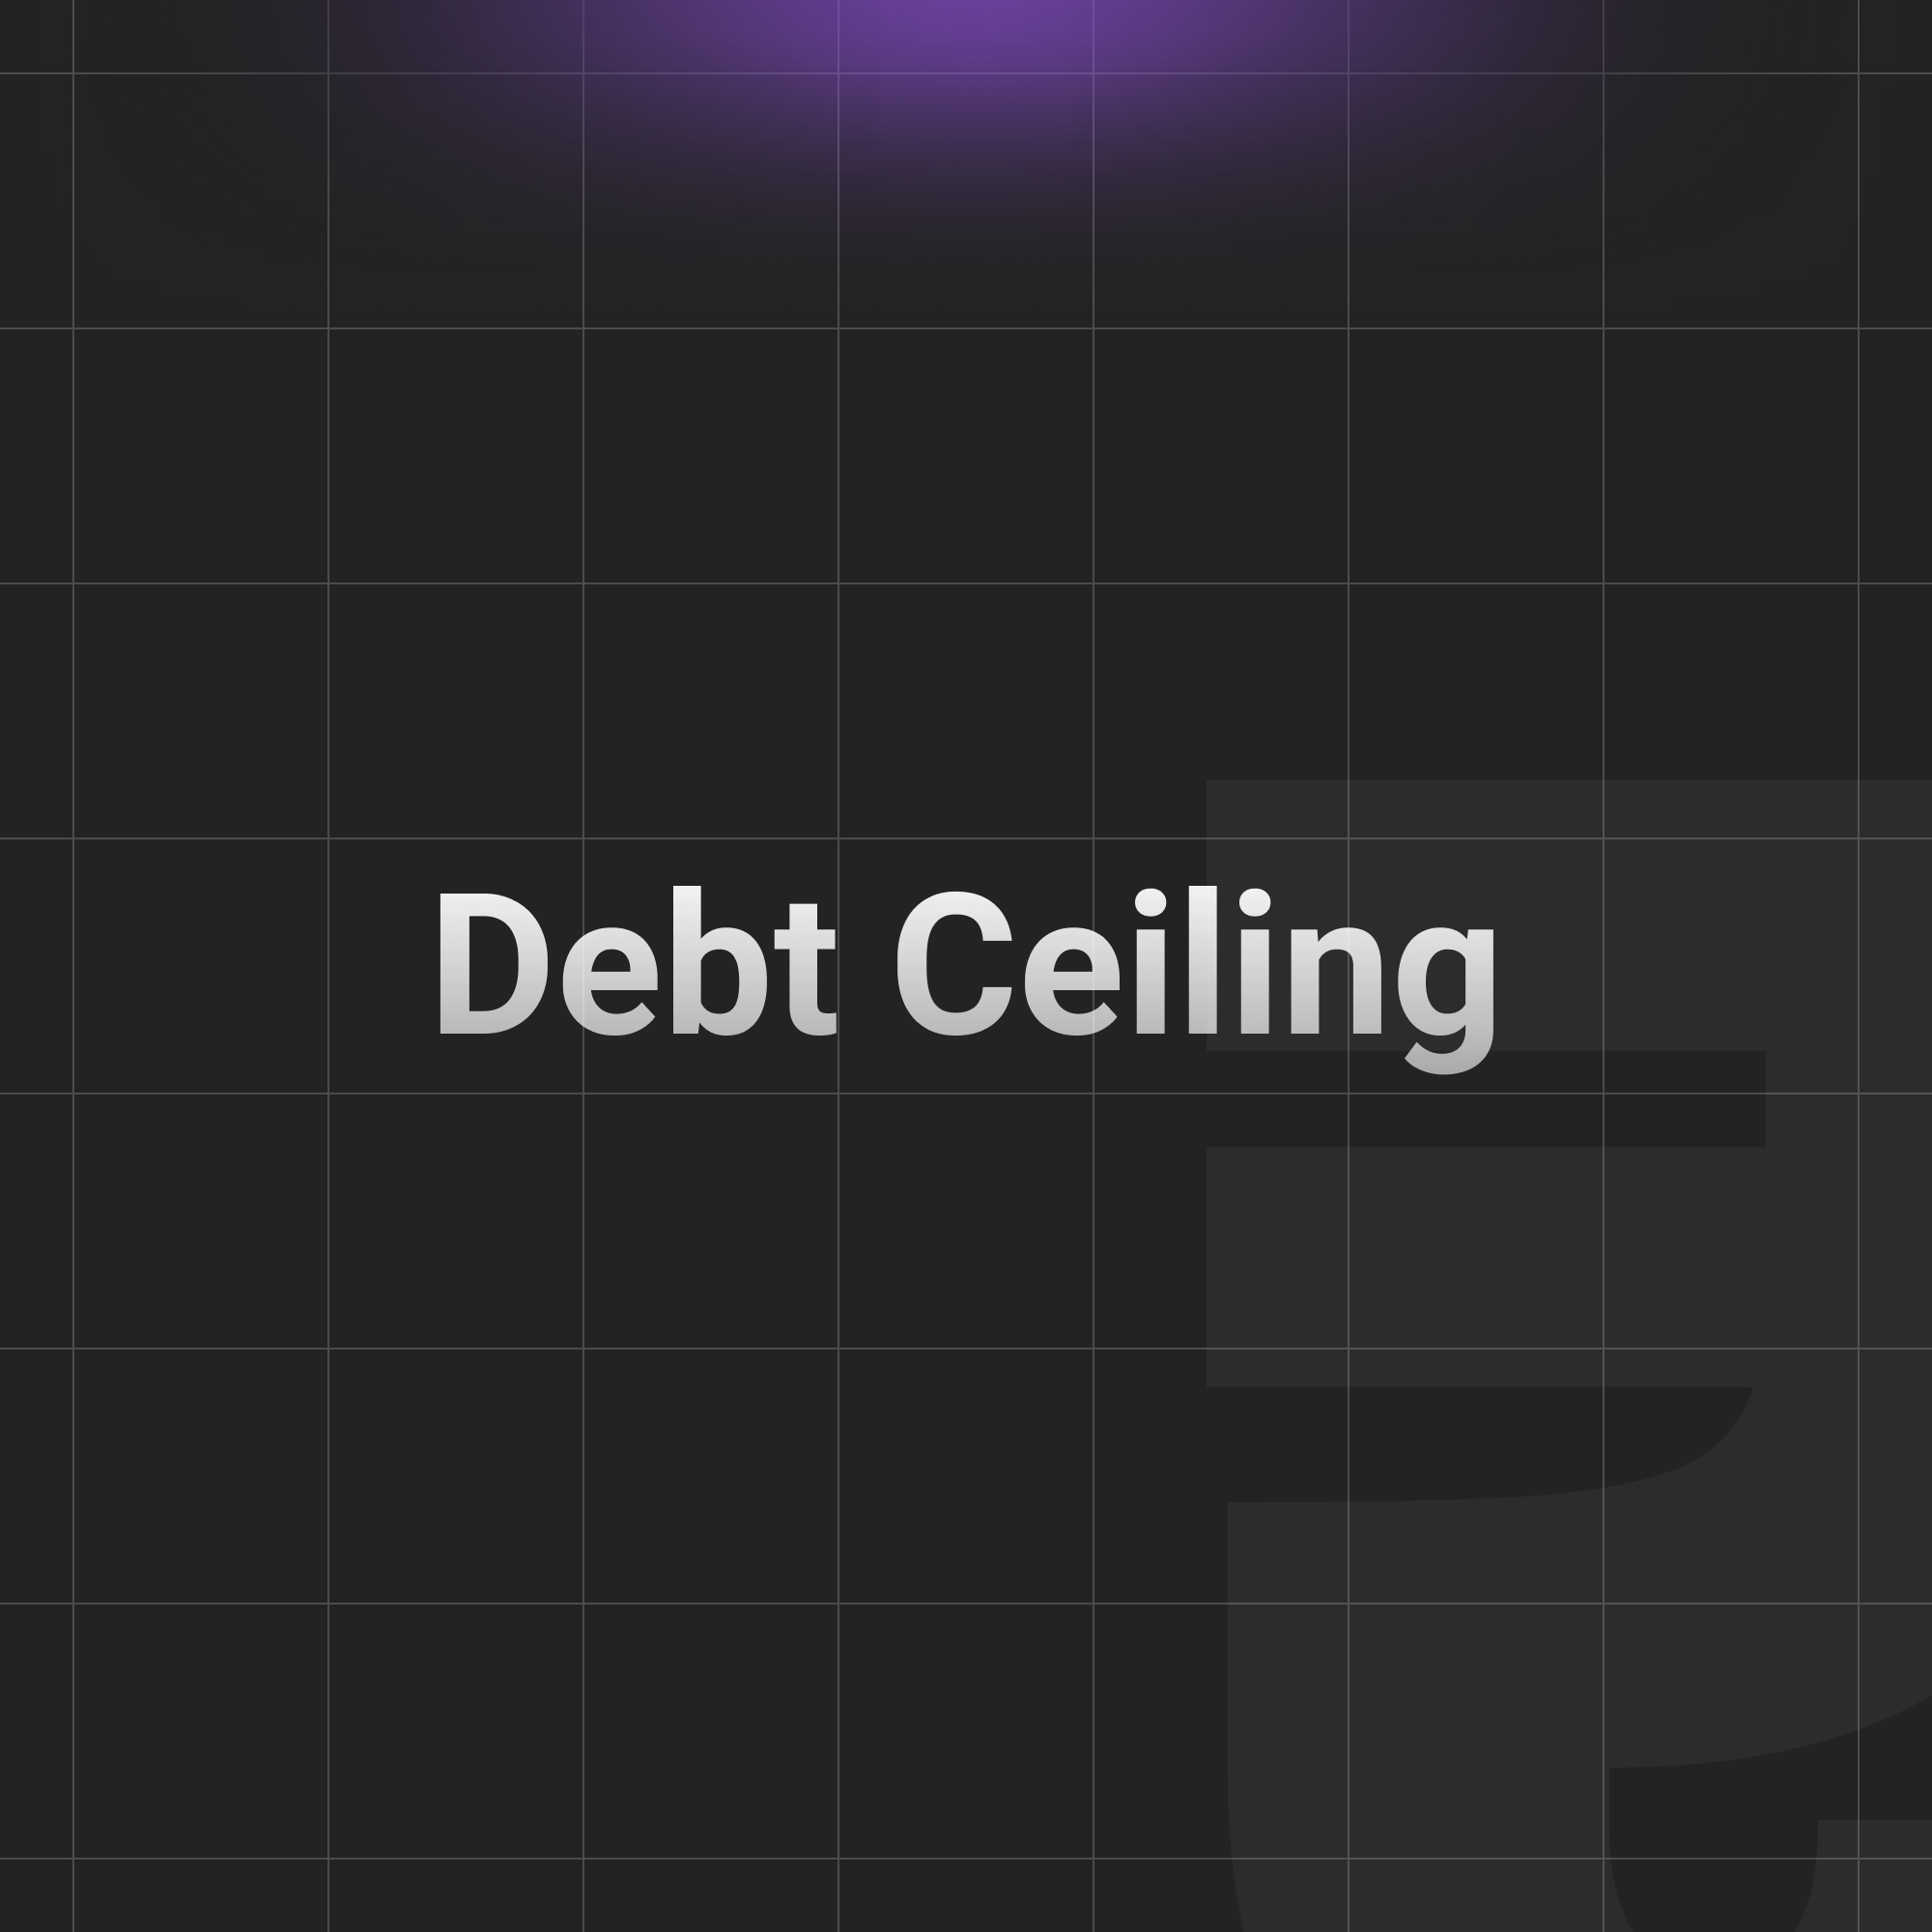 What are Debt ceiling?